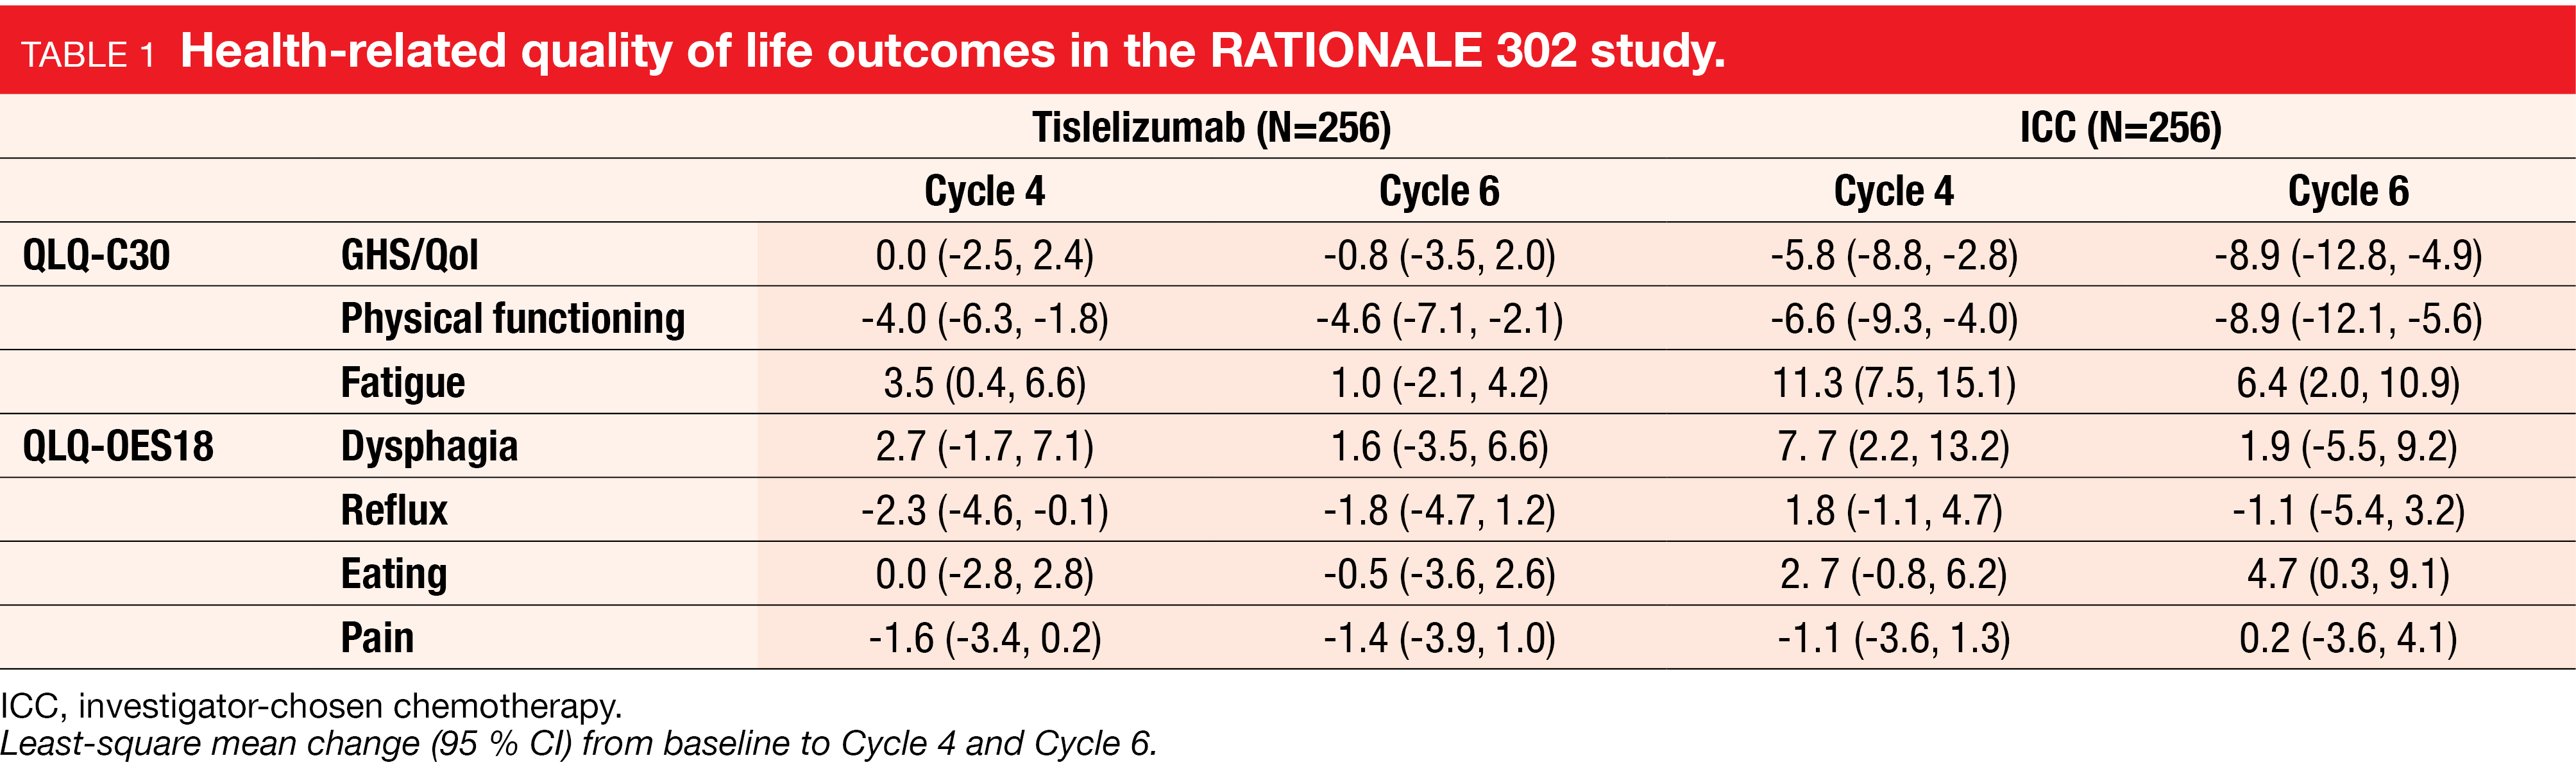 Table 1 Health-related quality of life outcomes in the RATIONALE 302 study.